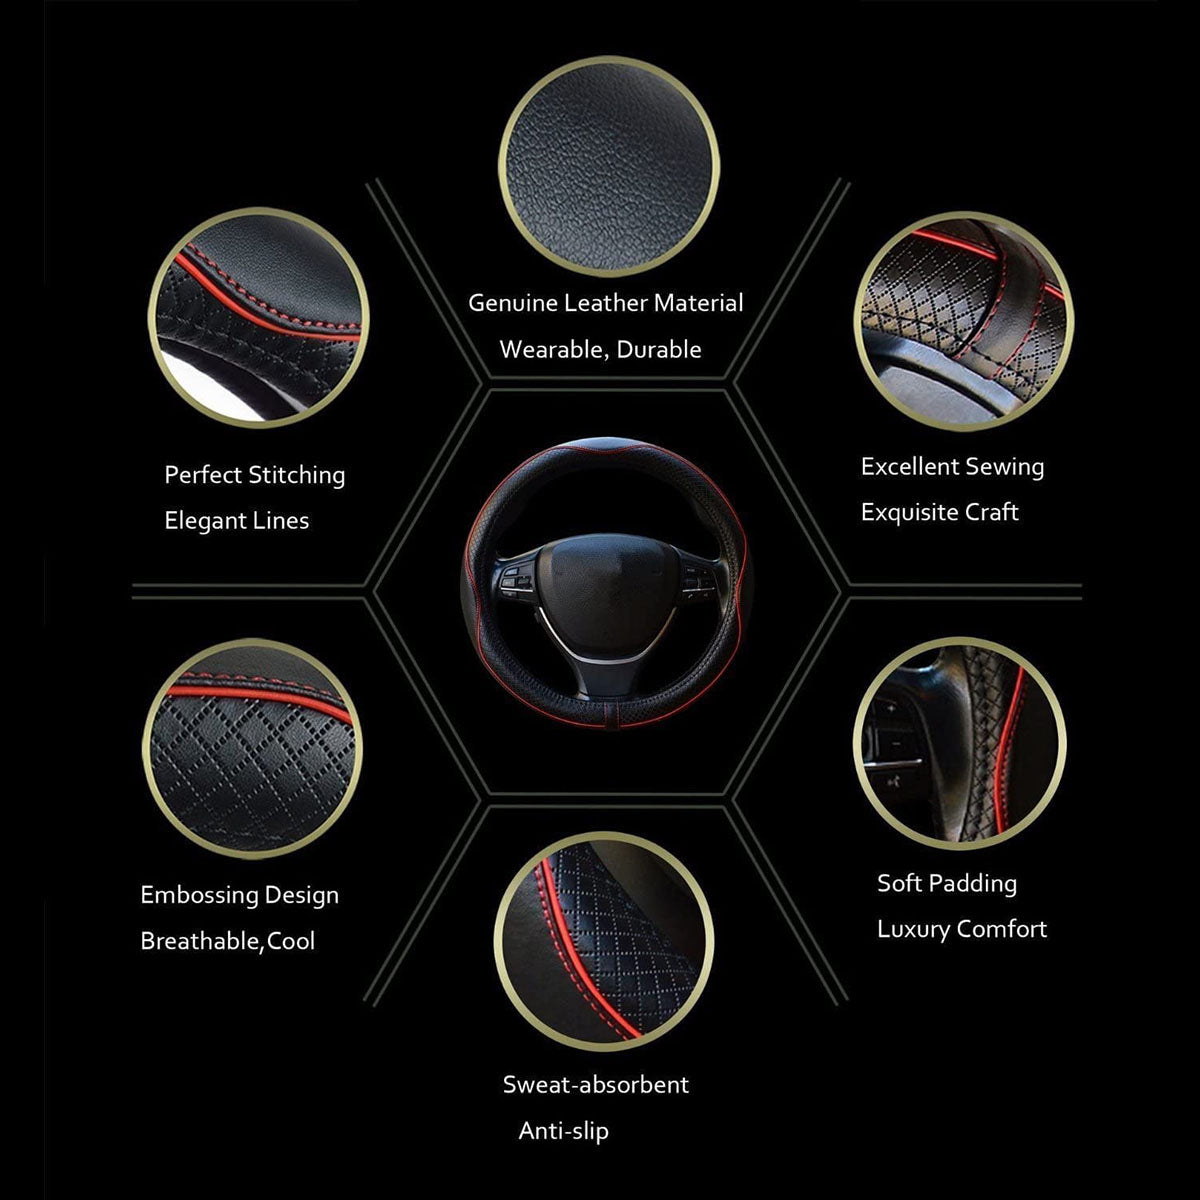 Car Steering Wheel Cover, Custom For Your Cars, Anti-Slip, Safety, Soft, Breathable, Heavy Duty, Thick, Full Surround, Sports Style, Car Accessories JE18990